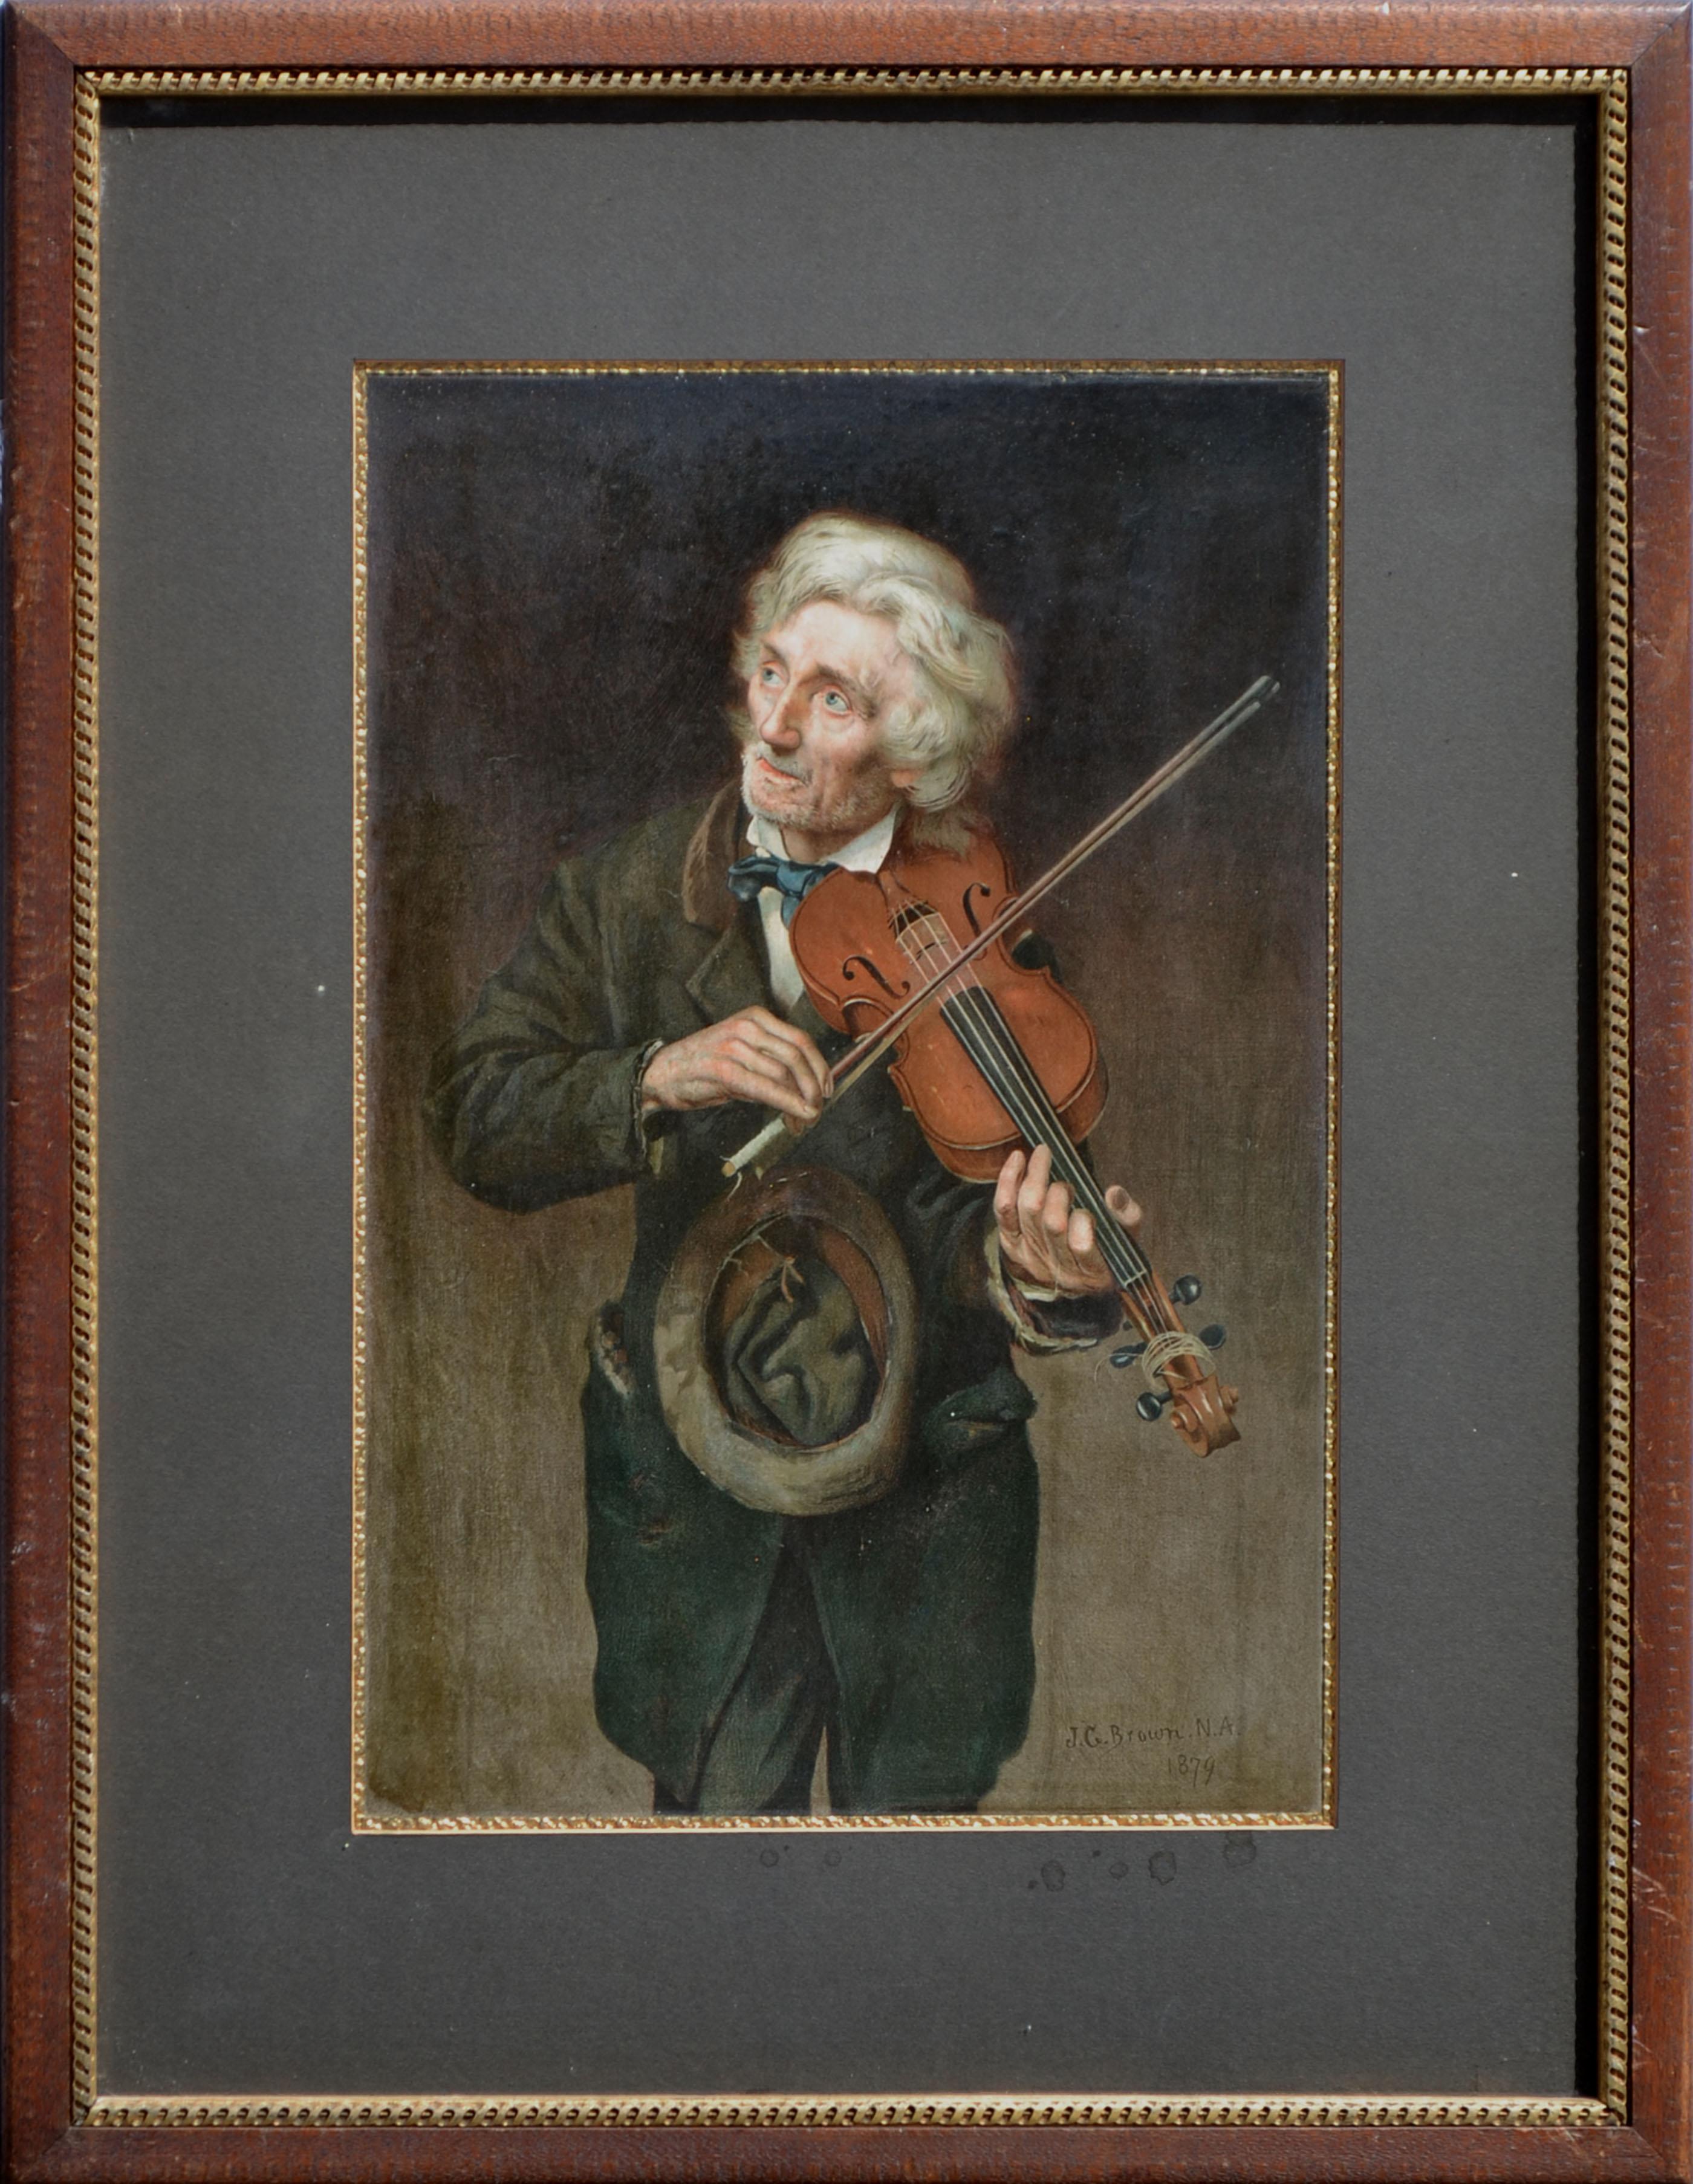 Old Violinist - Late 19th Century Figurative Lithograph